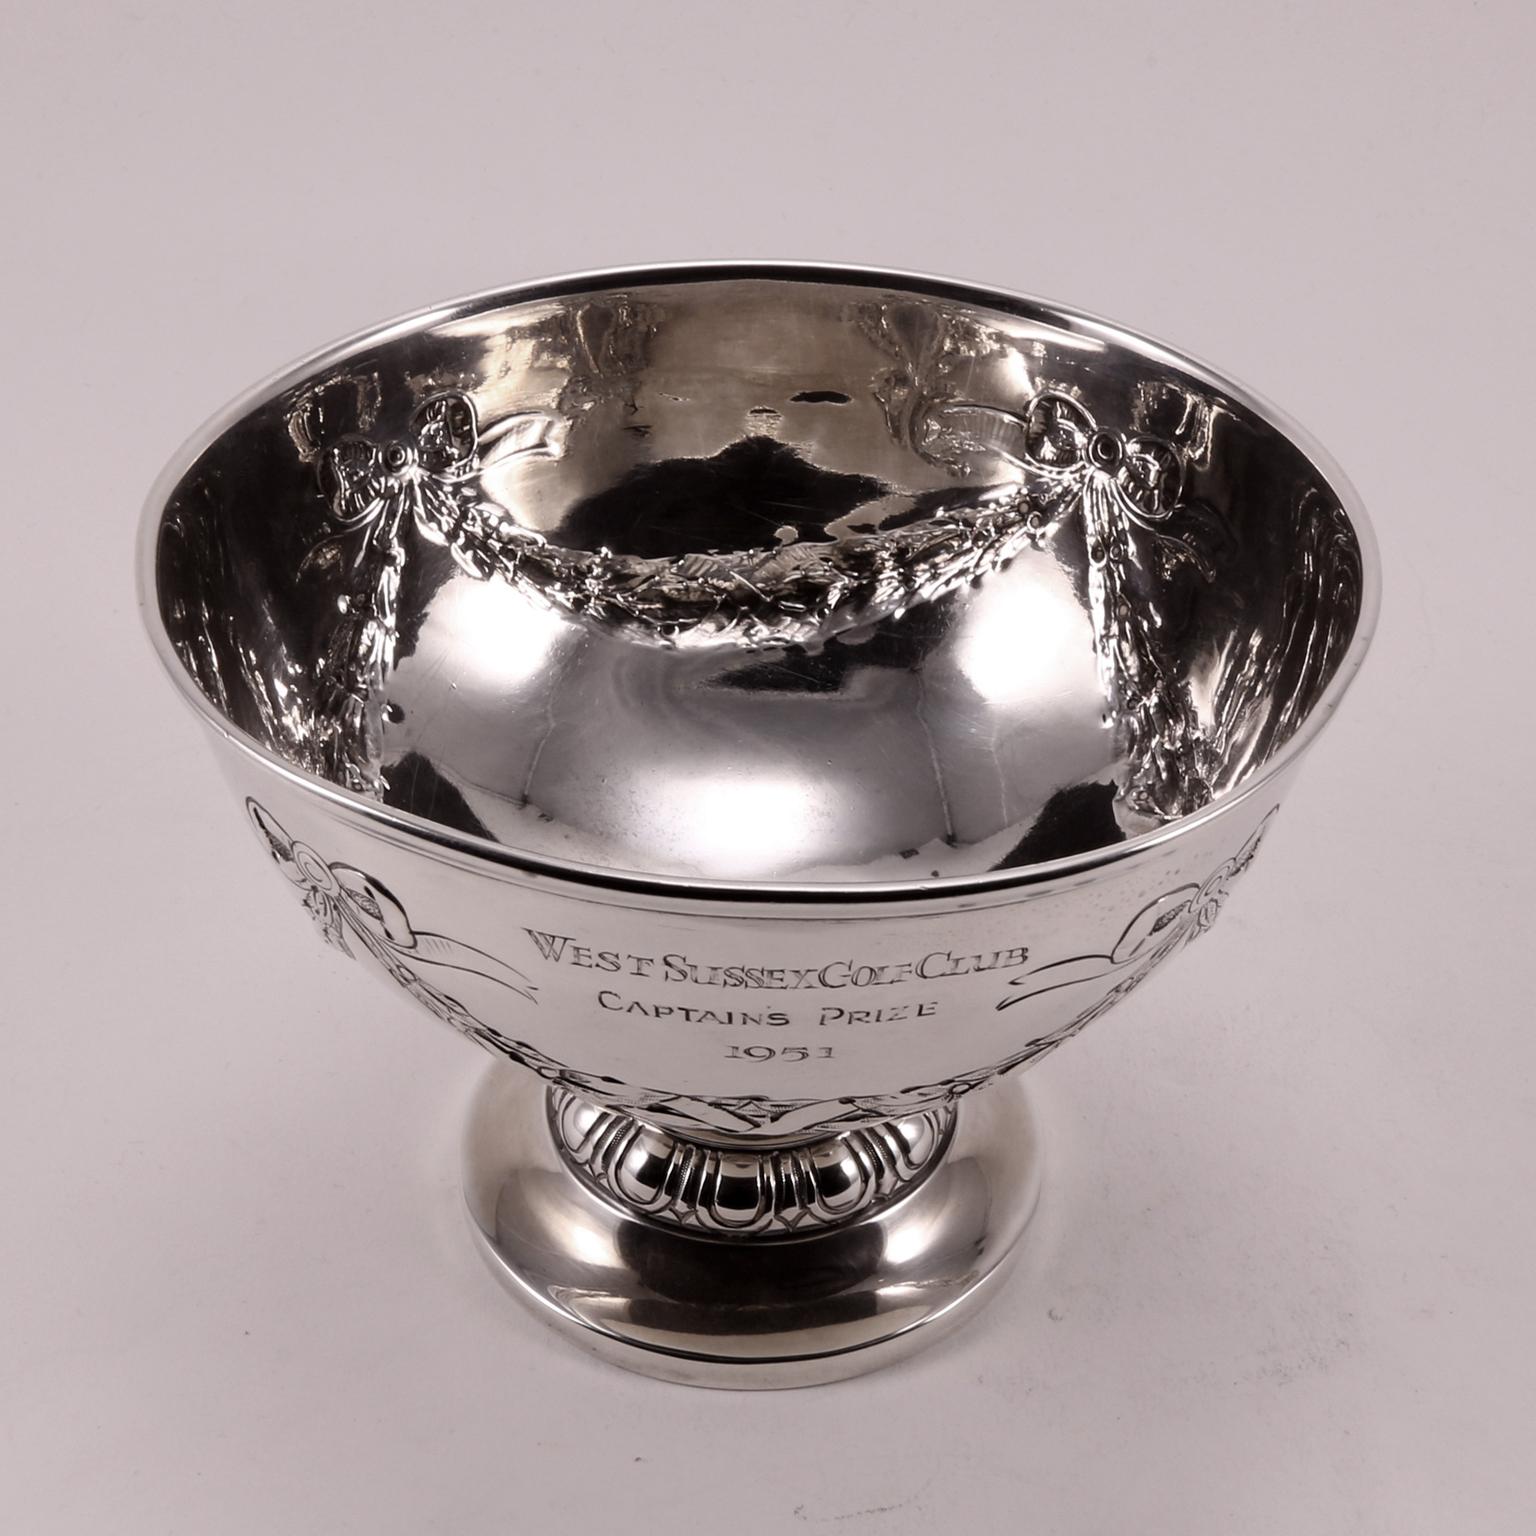 19th Century Mappin Webb Silver Bowl Decorated with Flackes and Flowers (19. Jahrhundert) im Angebot